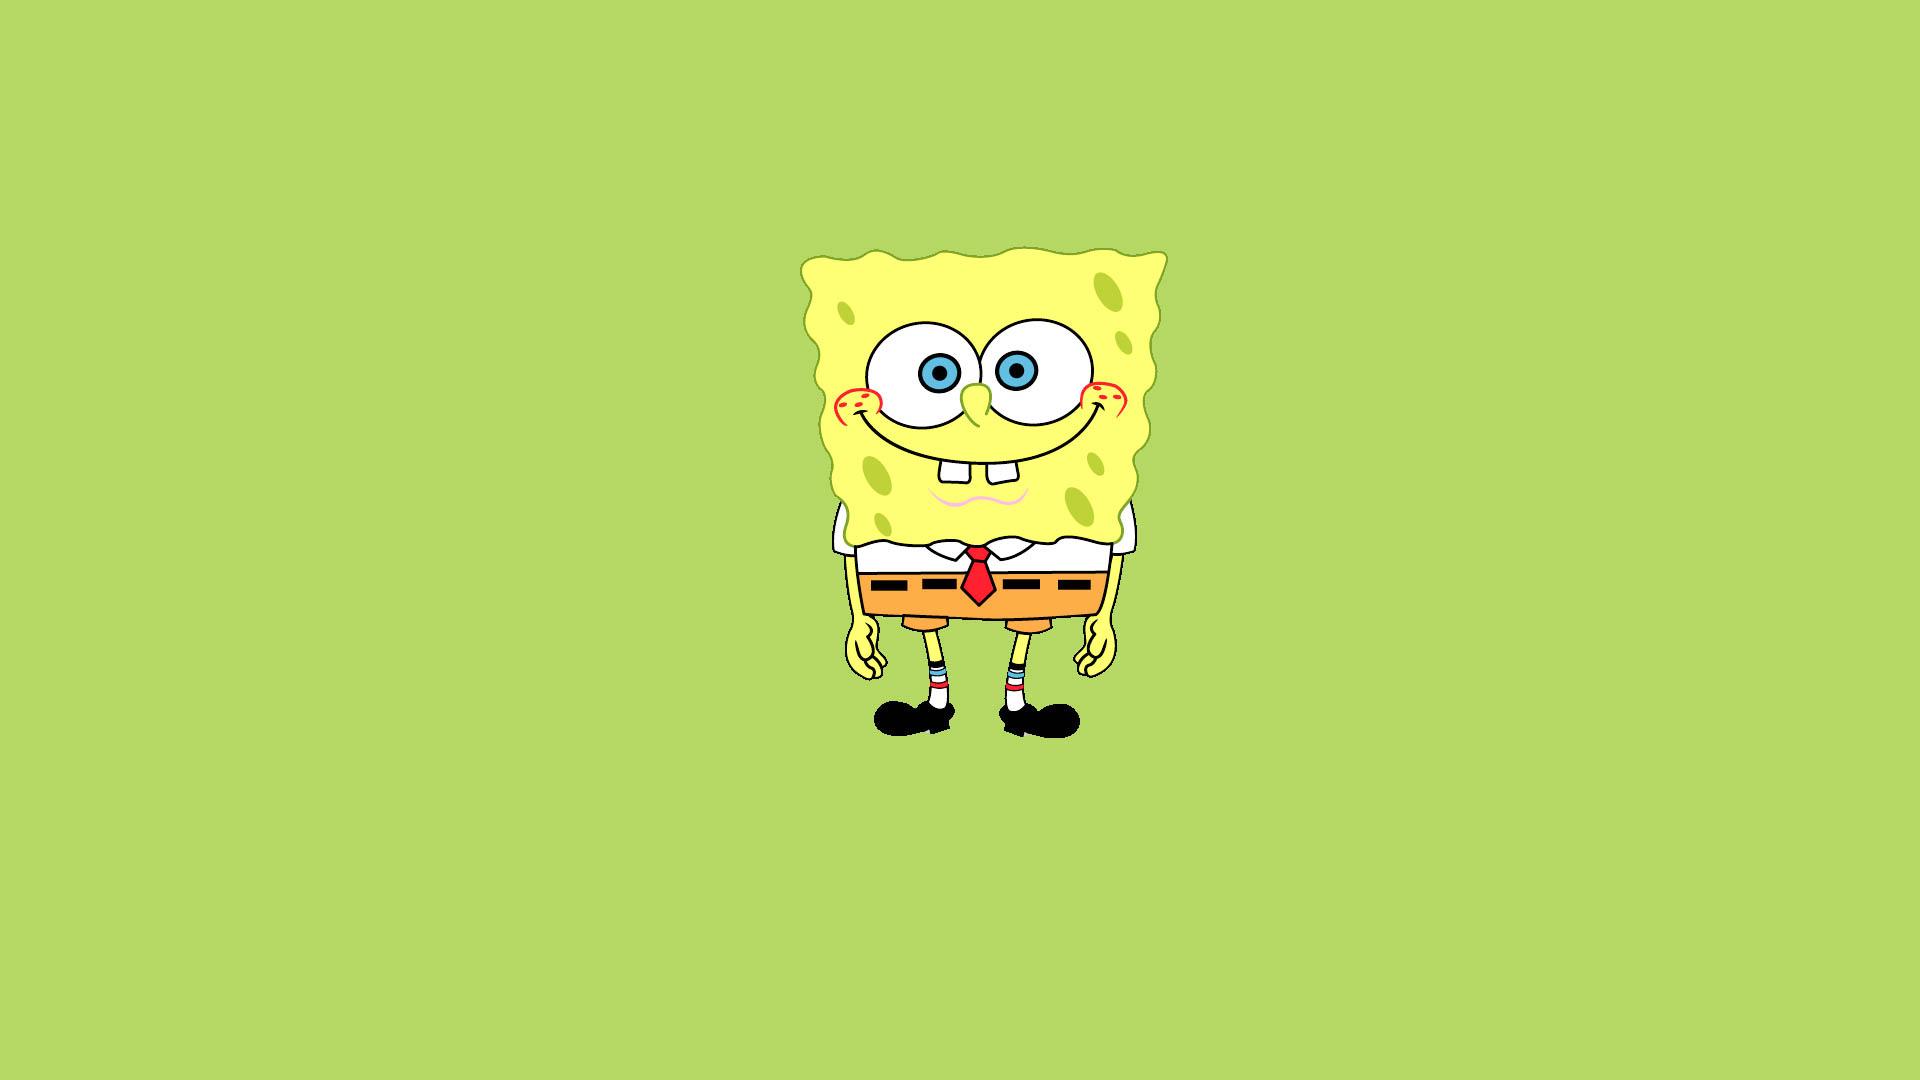 Tons of awesome spongebob supreme wallpapers to download for free. 